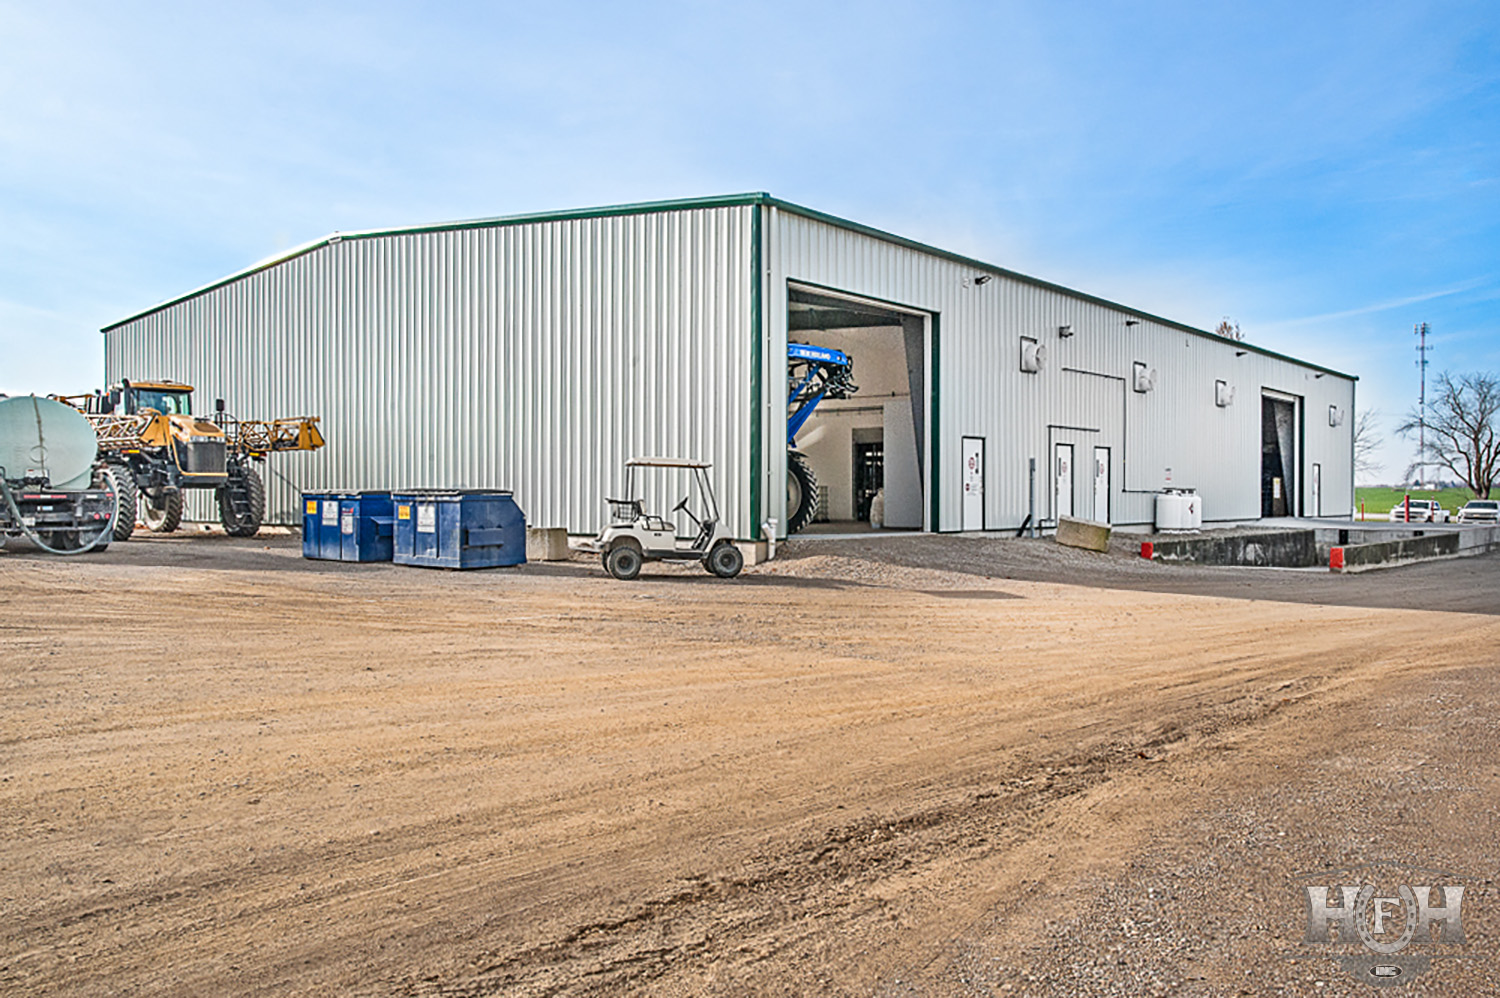 Exterior chemical storage building with golf cart and various machinery